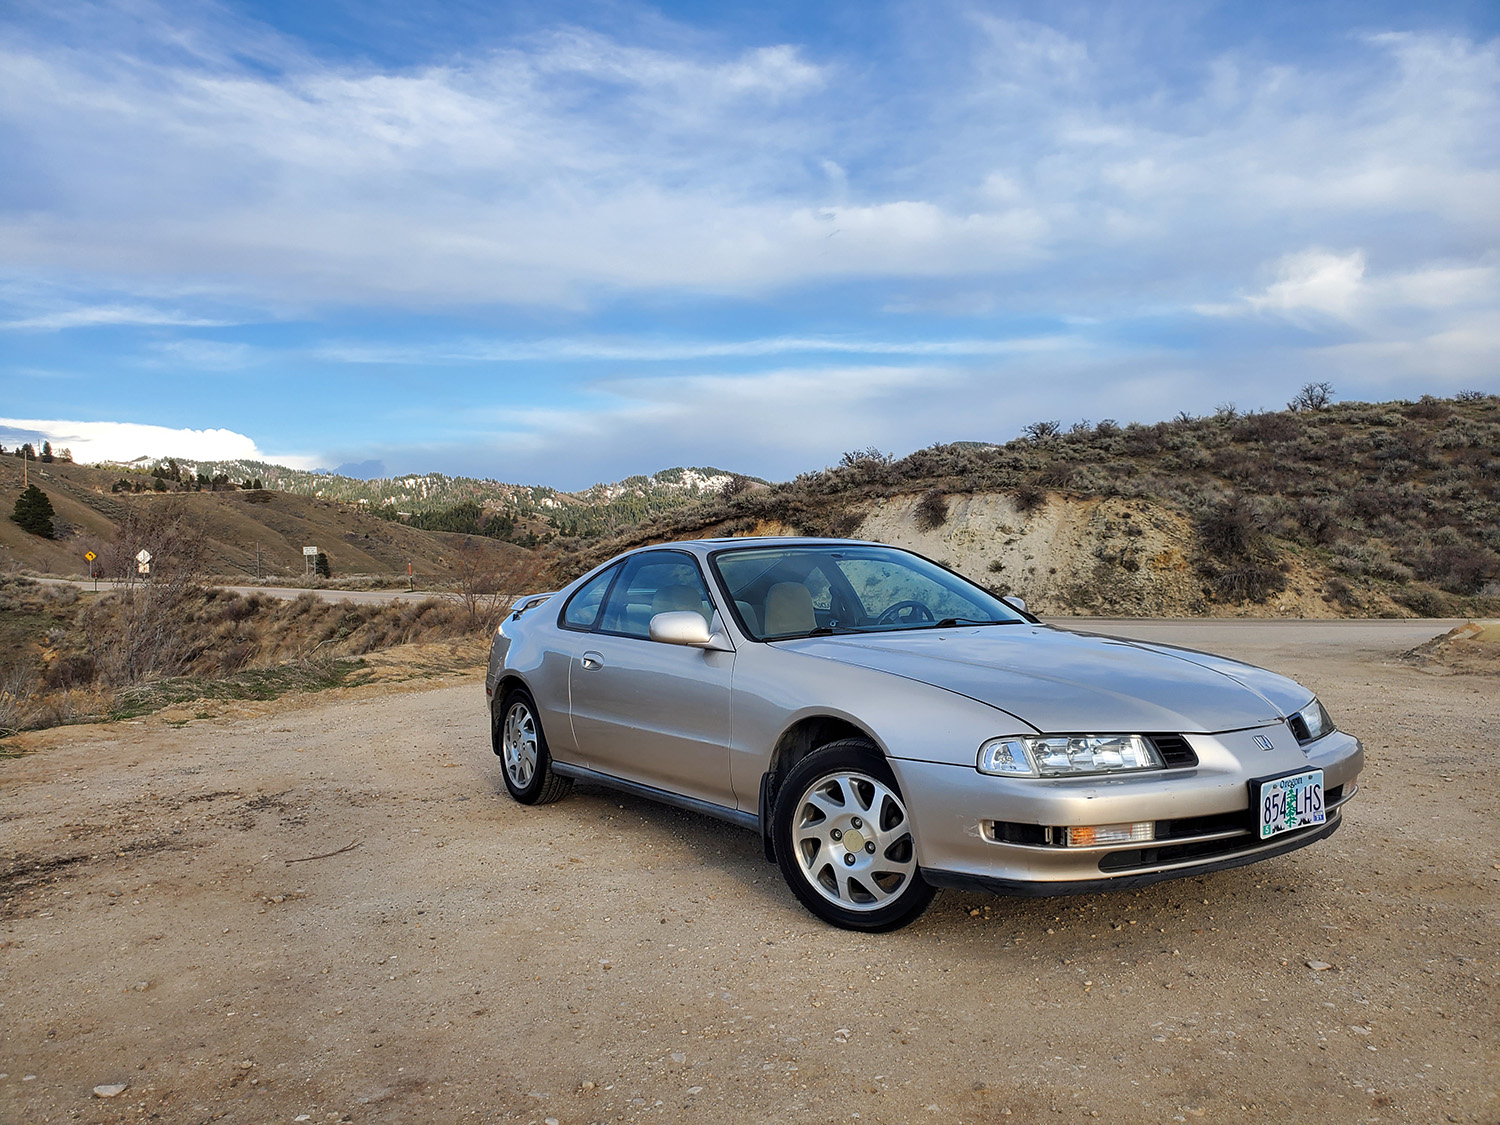 Silver 1996 Honda Prelude Si parked on mountain road with snow caps in background